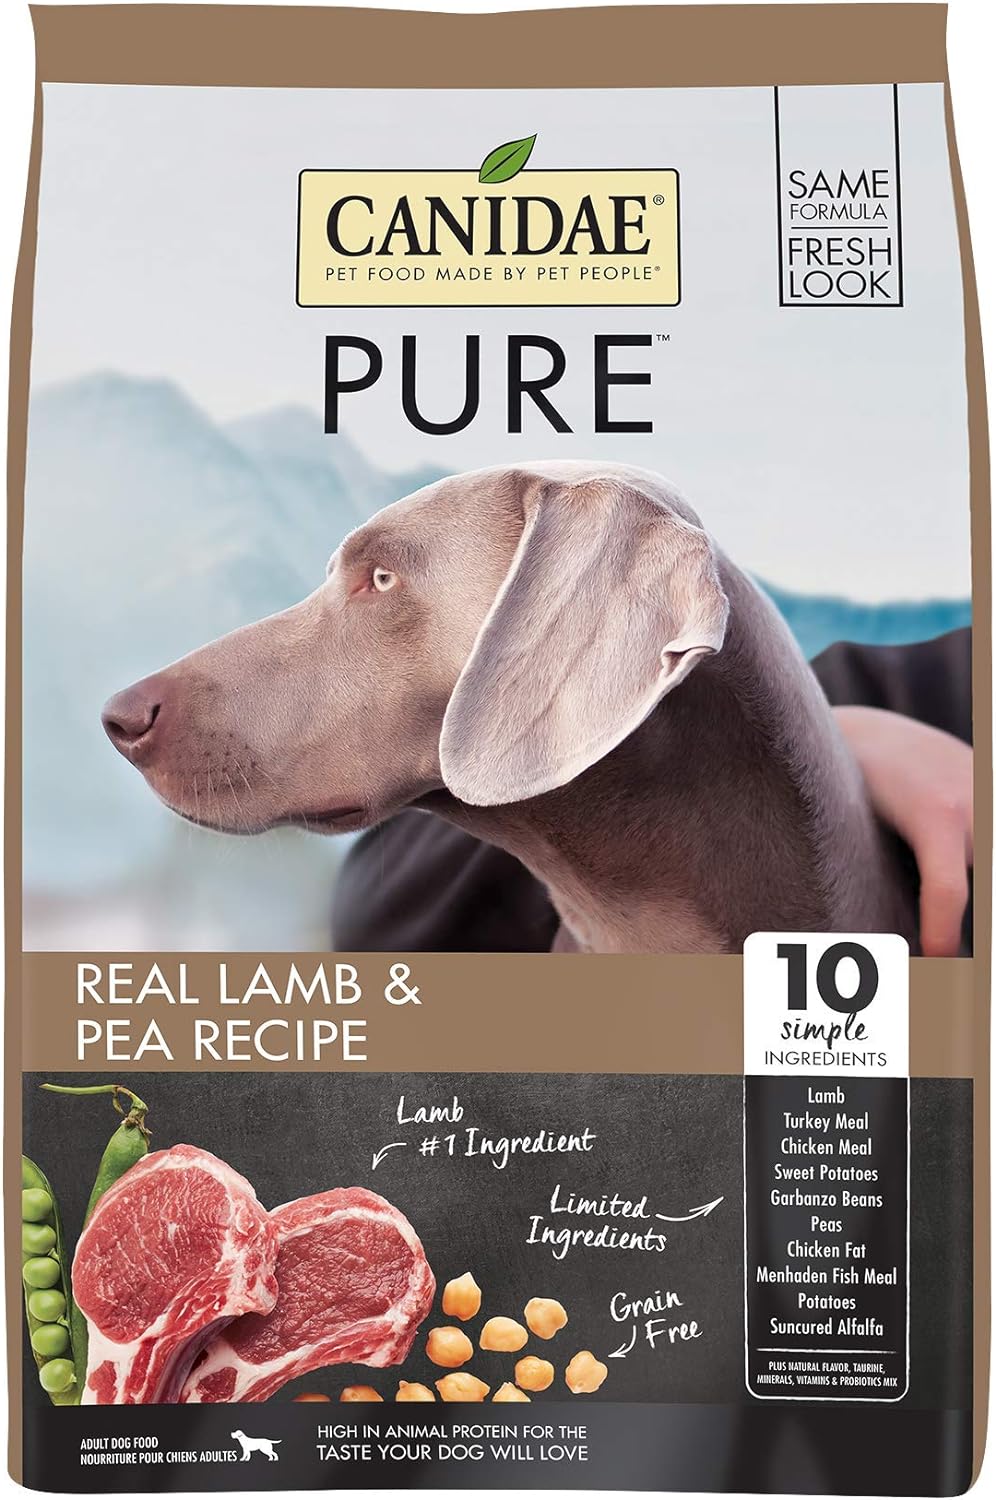 Canidae PURE Limited Ingredient Premium Adult Dry Dog Food, Lamb and Pea Recipe (New look- Real Lamb and Sweet Potato Recipe), 12 Pounds, Grain Free